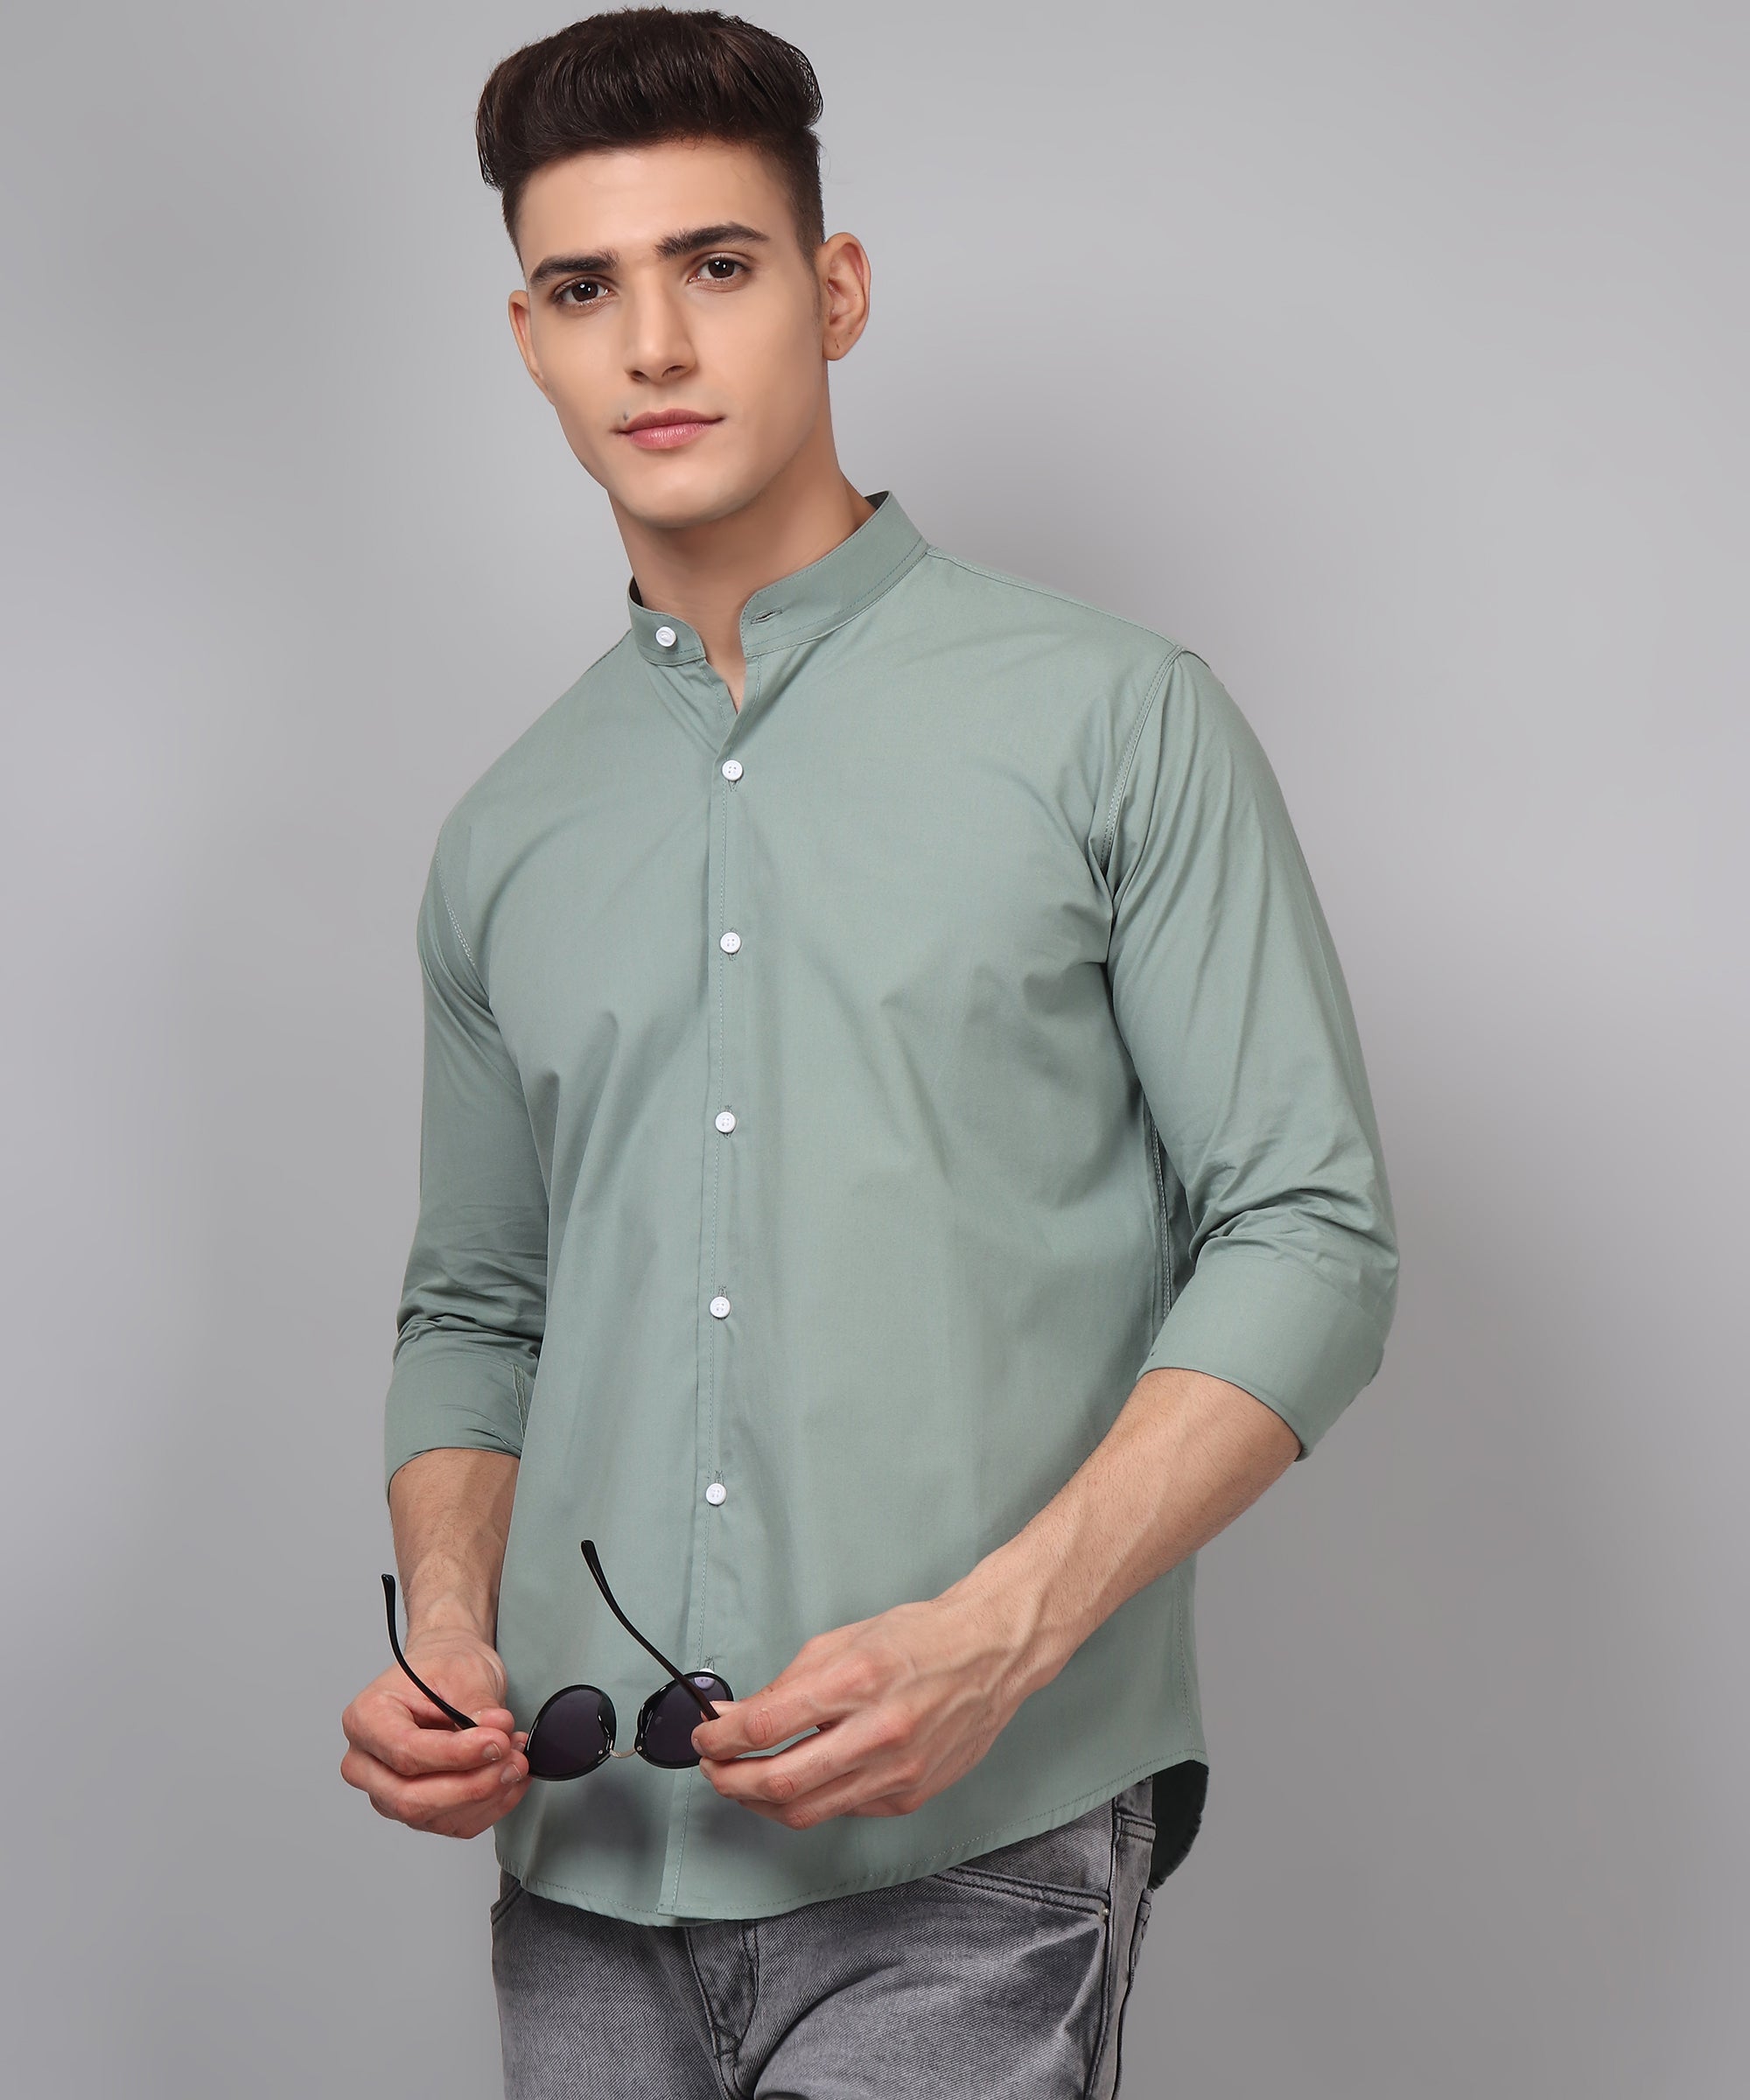 Ocean Green Elegance: Navigating Style with Refreshing Hues for Men